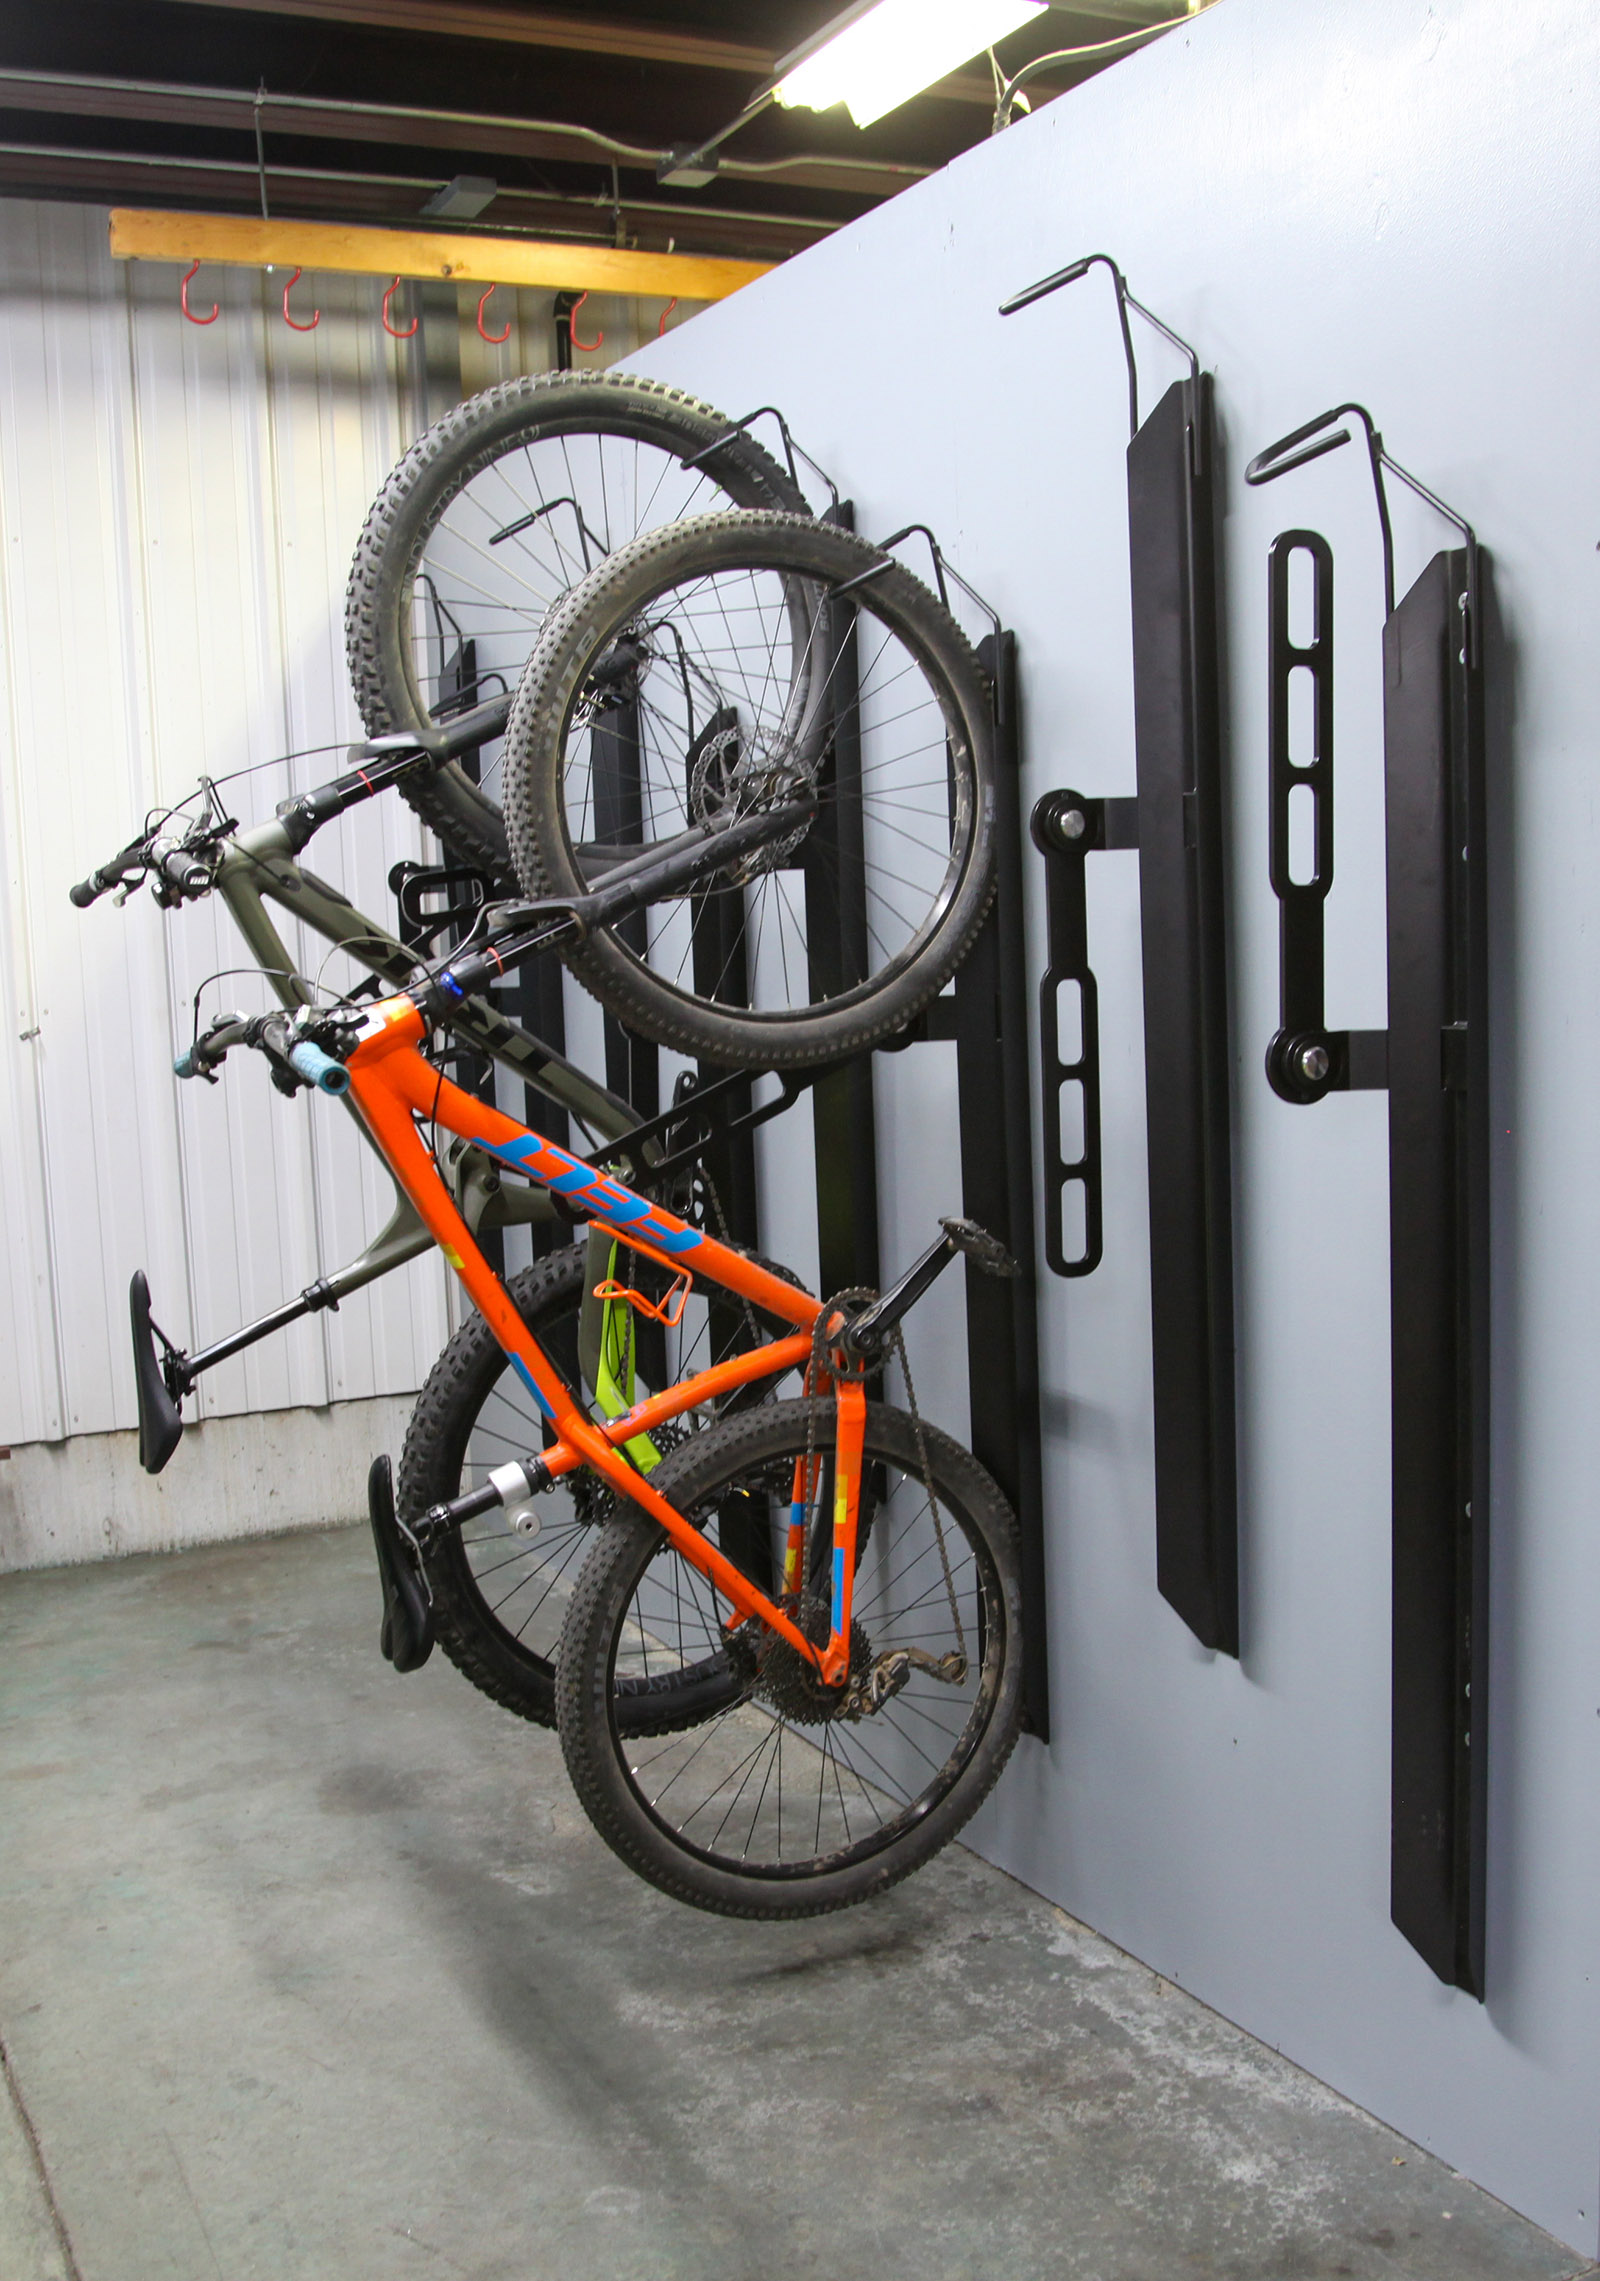 Vertical Rack being loaded with bike